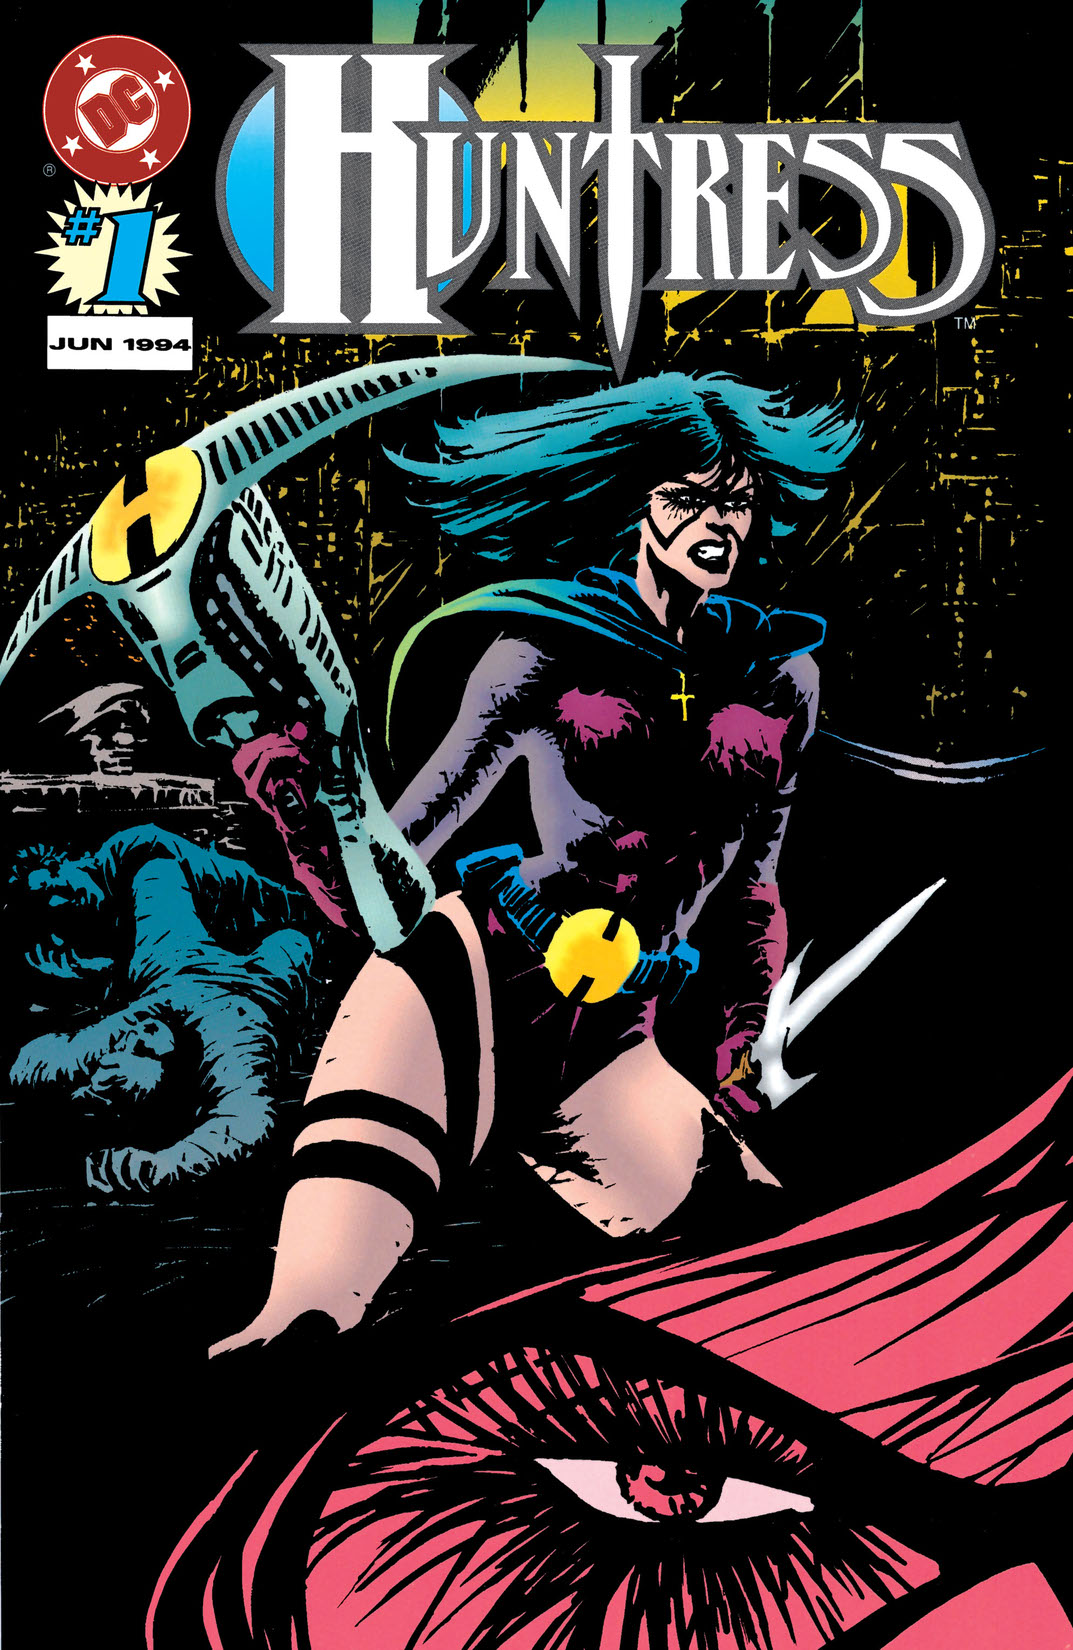 The Huntress (1994-) #1 preview images